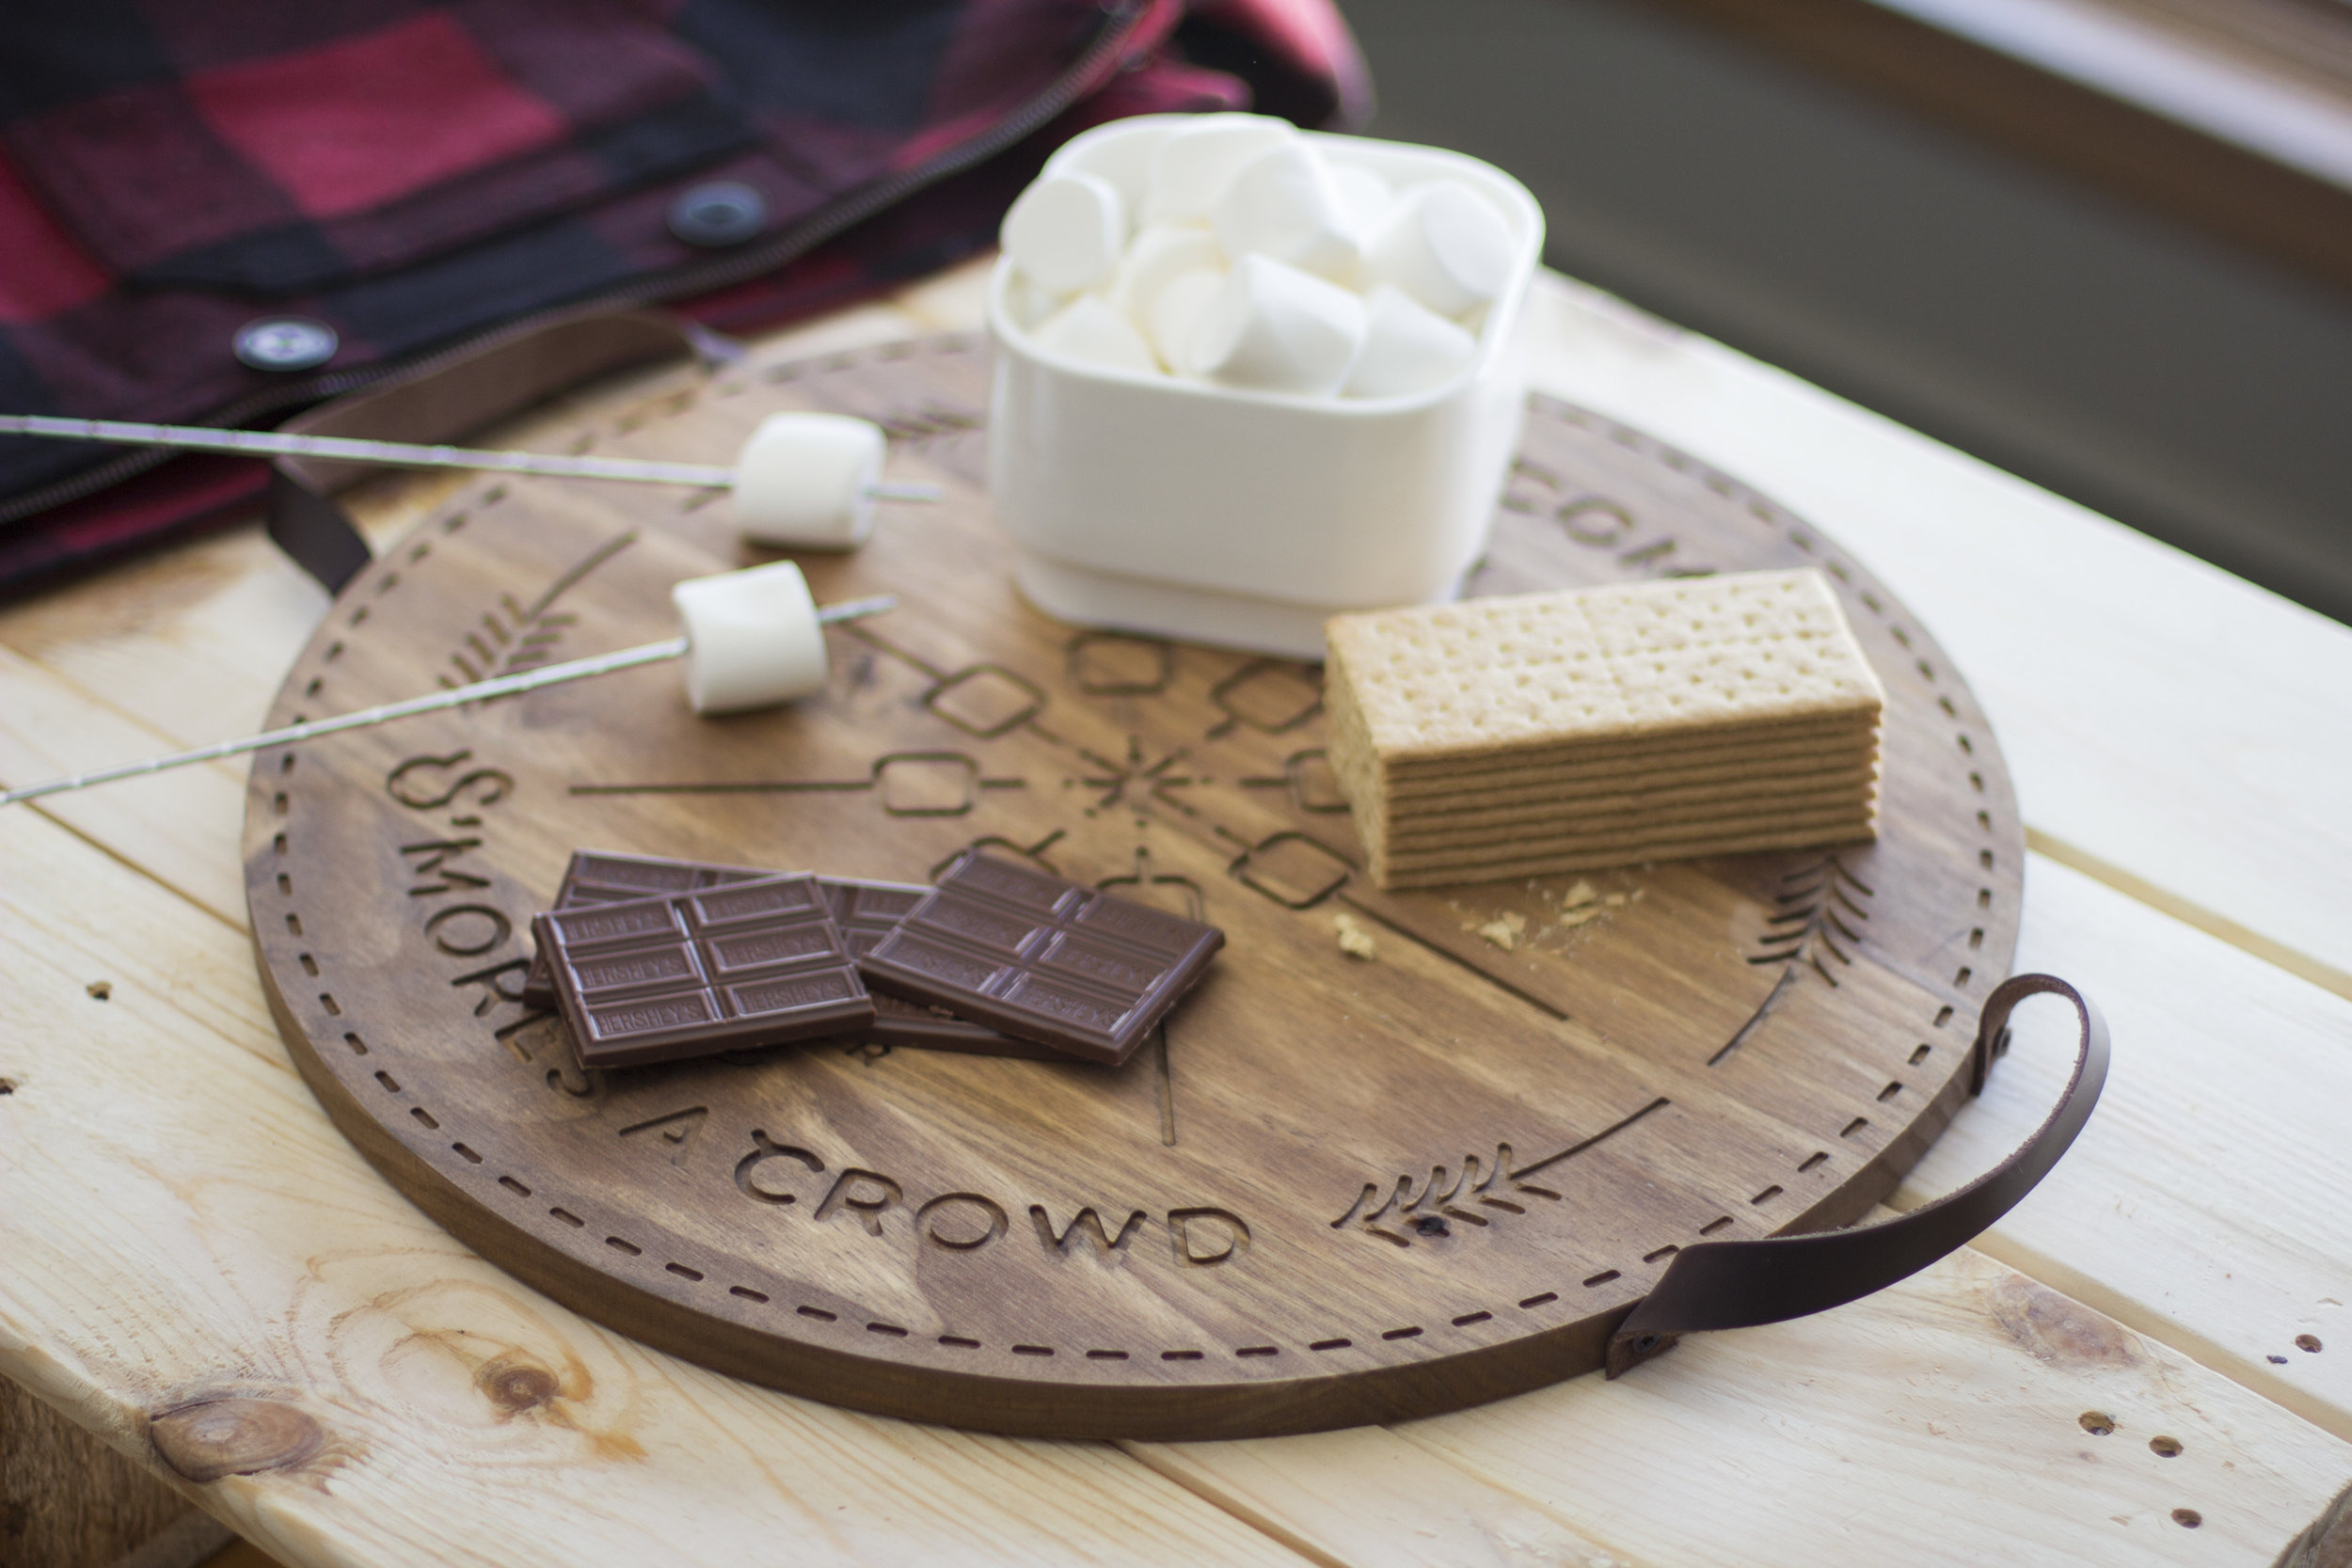 S'mores a Crowd tray by Timbr